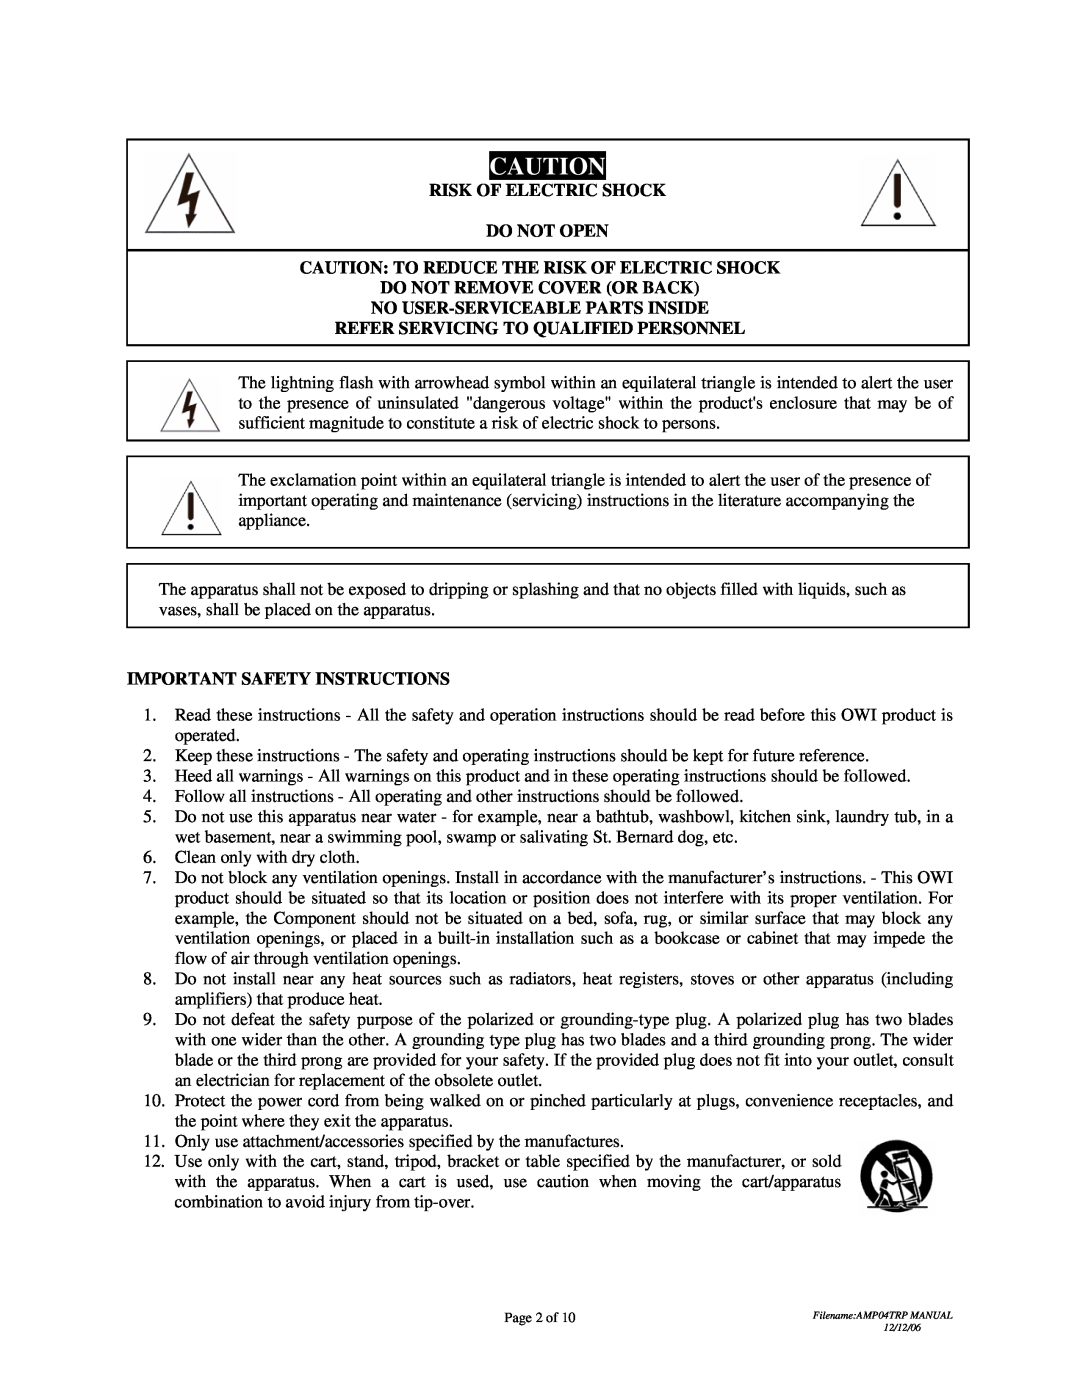 OWI AMP-04TRP installation instructions Risk Of Electric Shock Do Not Open, Caution To Reduce The Risk Of Electric Shock 